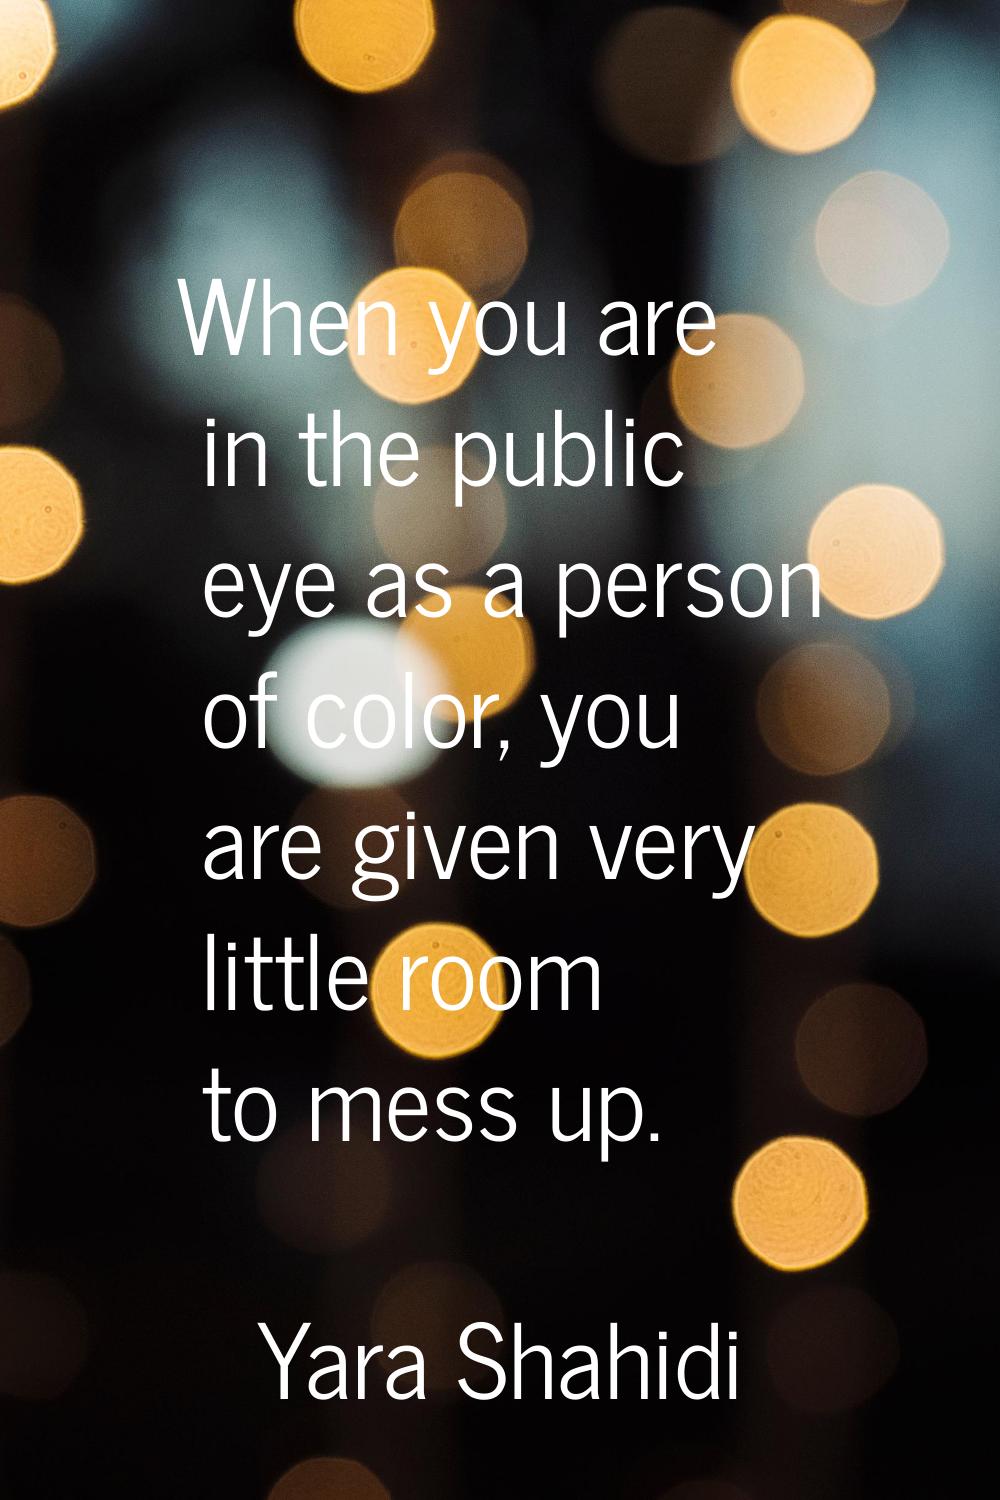 When you are in the public eye as a person of color, you are given very little room to mess up.